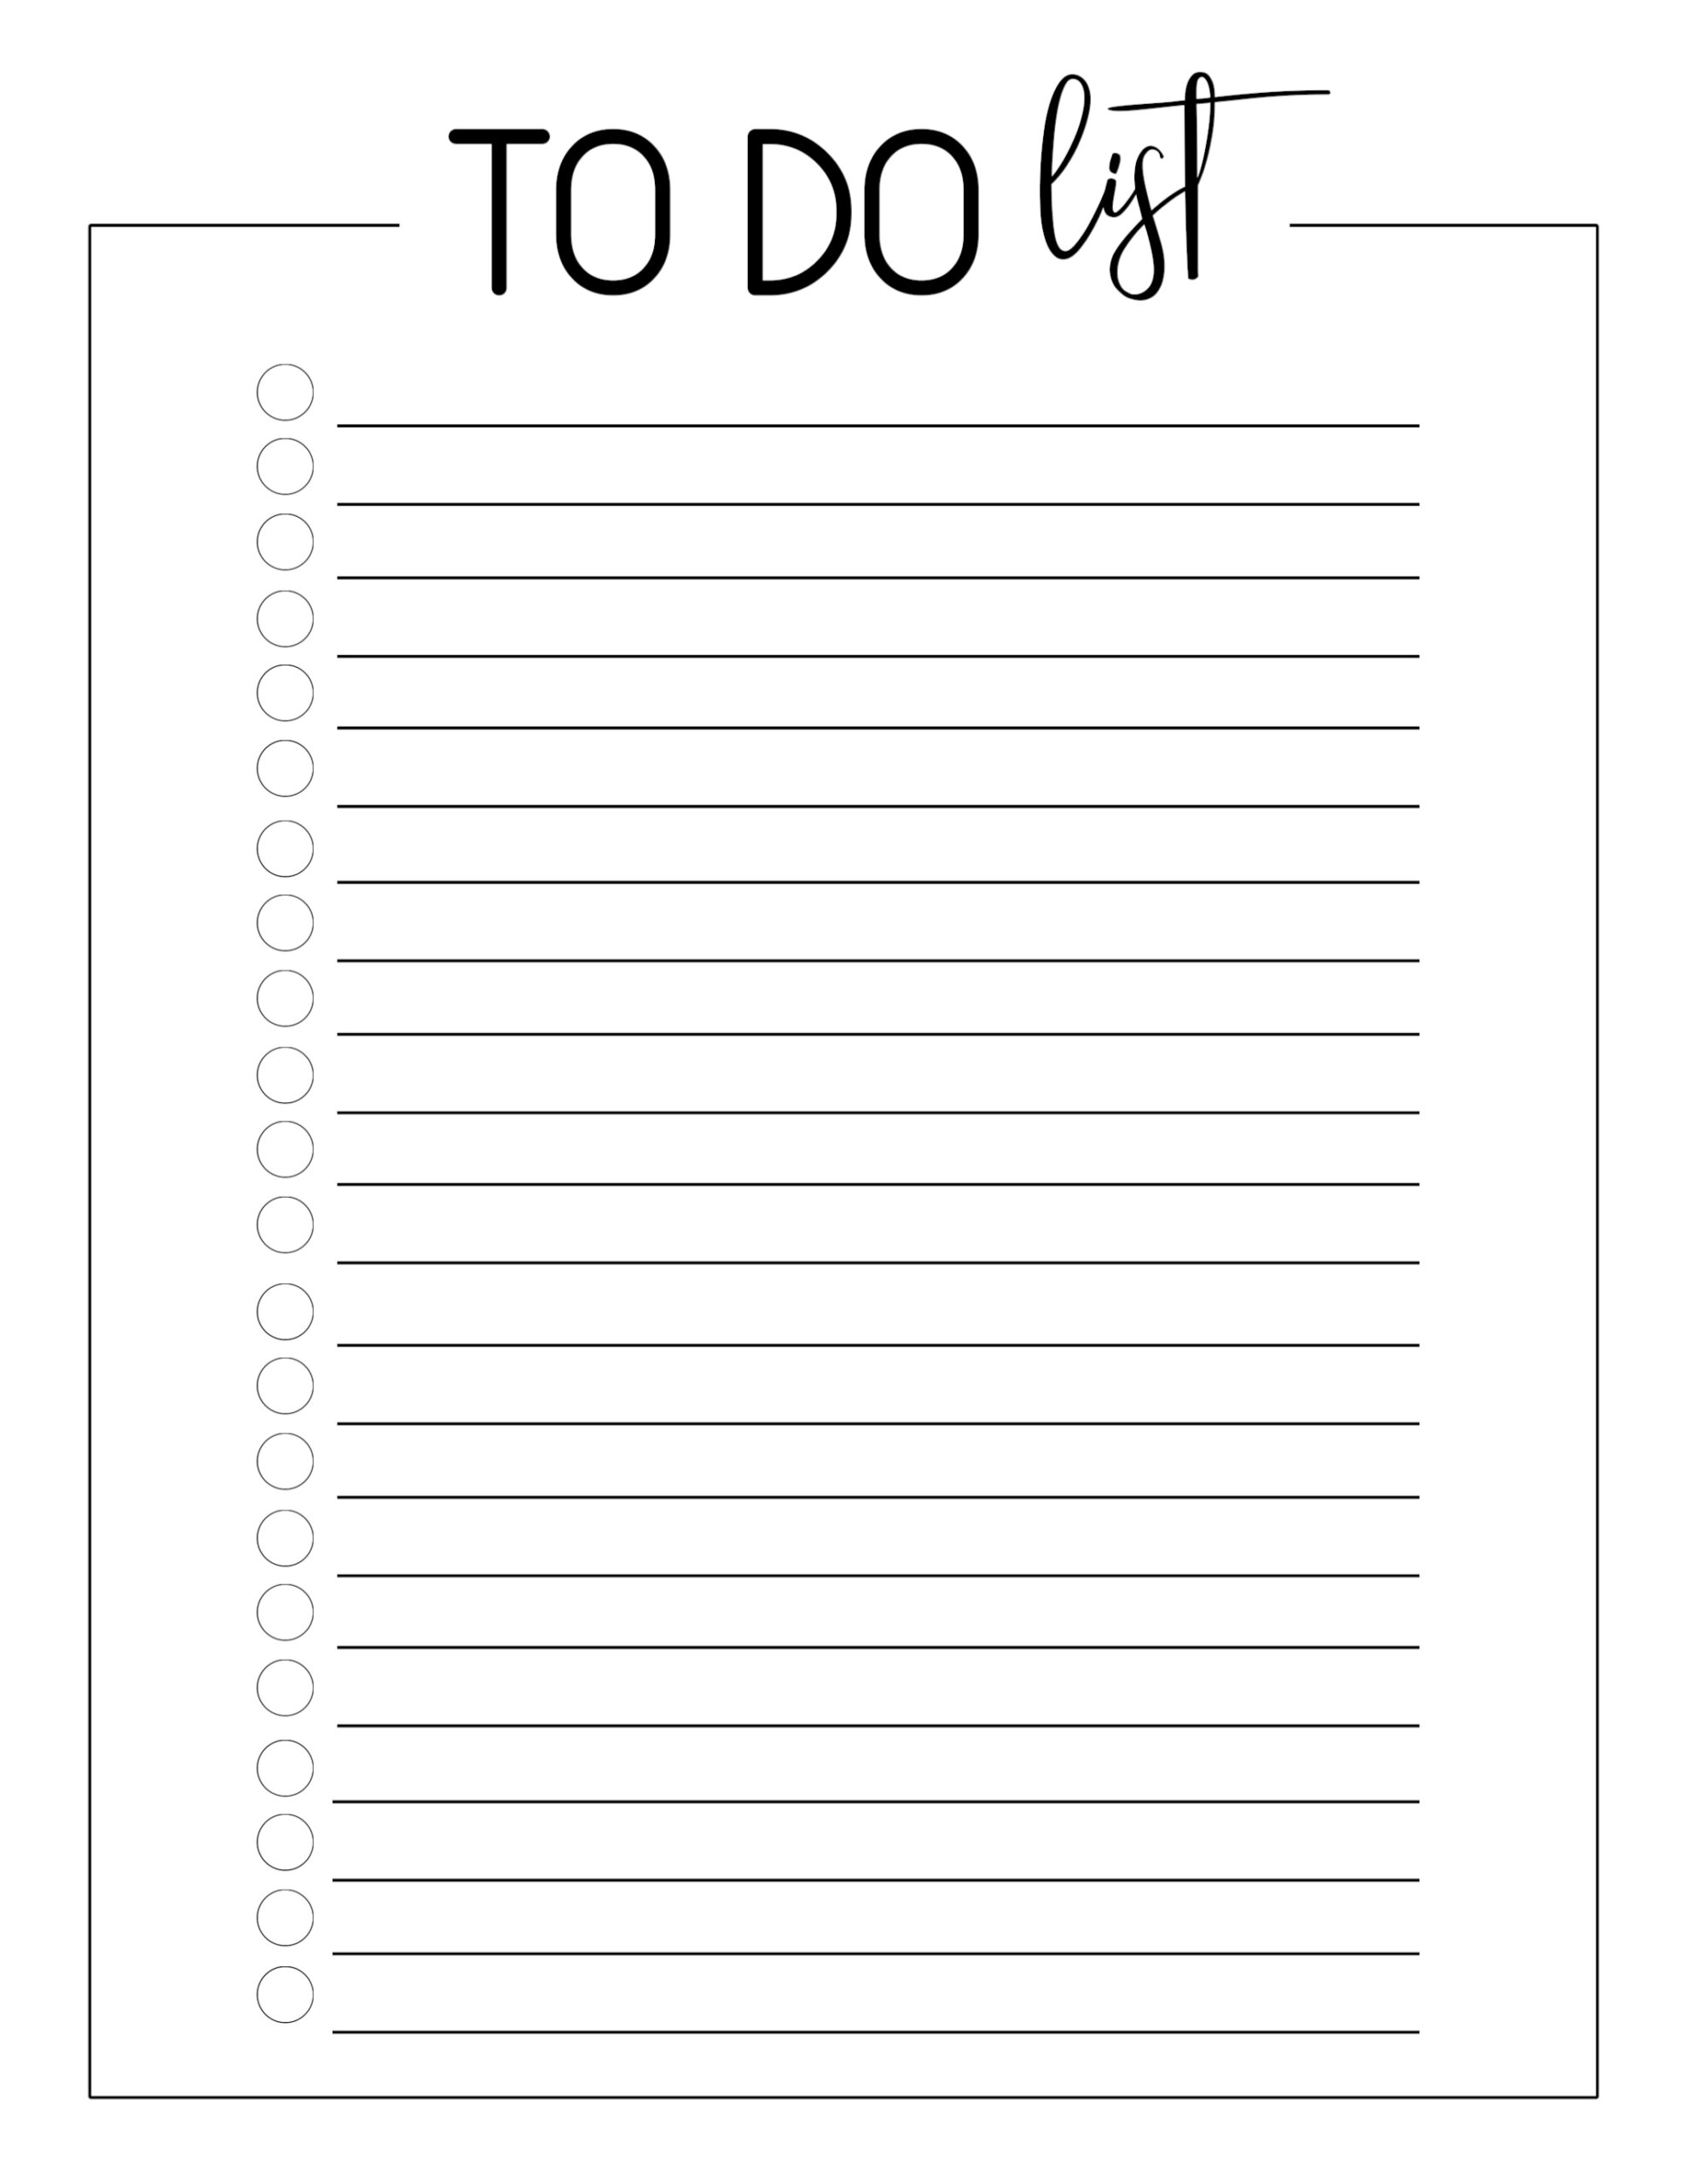 Free Printable To Do Checklist Template - Paper Trail Design In Blank Checklist Template Pdf